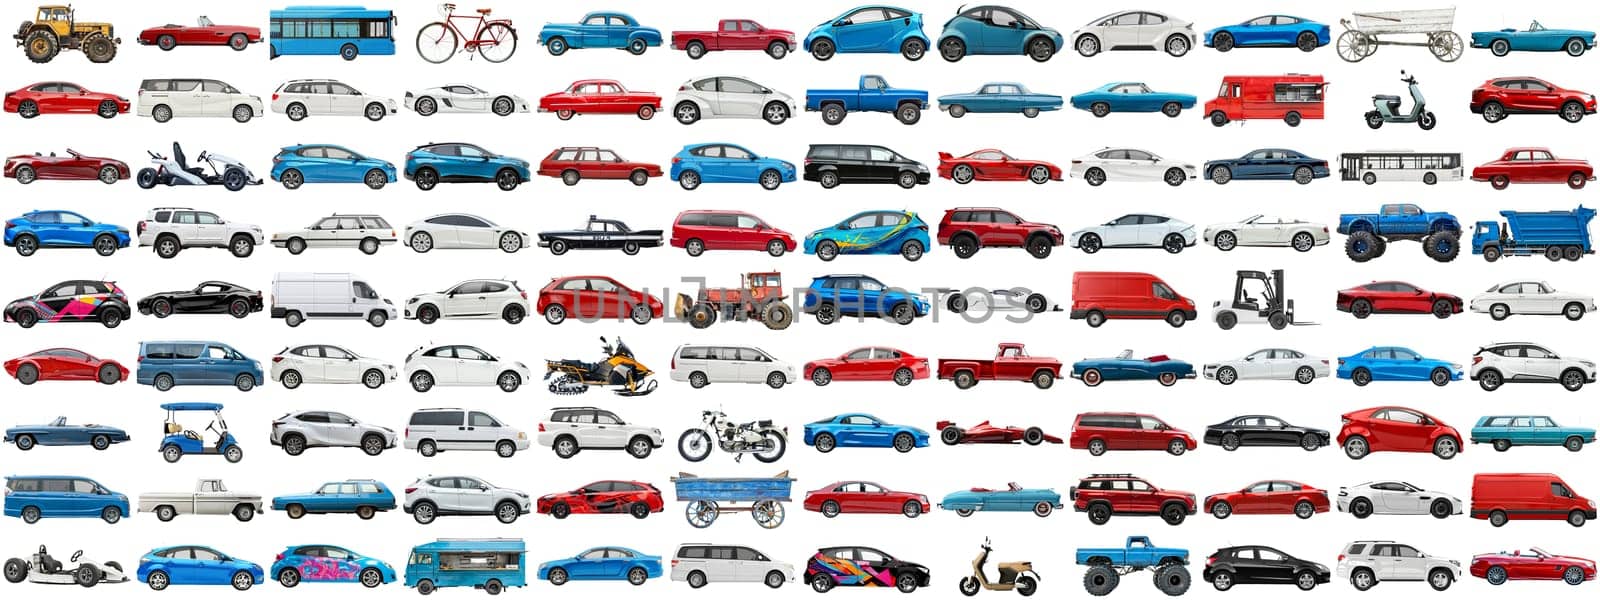 108 cars and various vehicles set on isolated background AIG44 by biancoblue